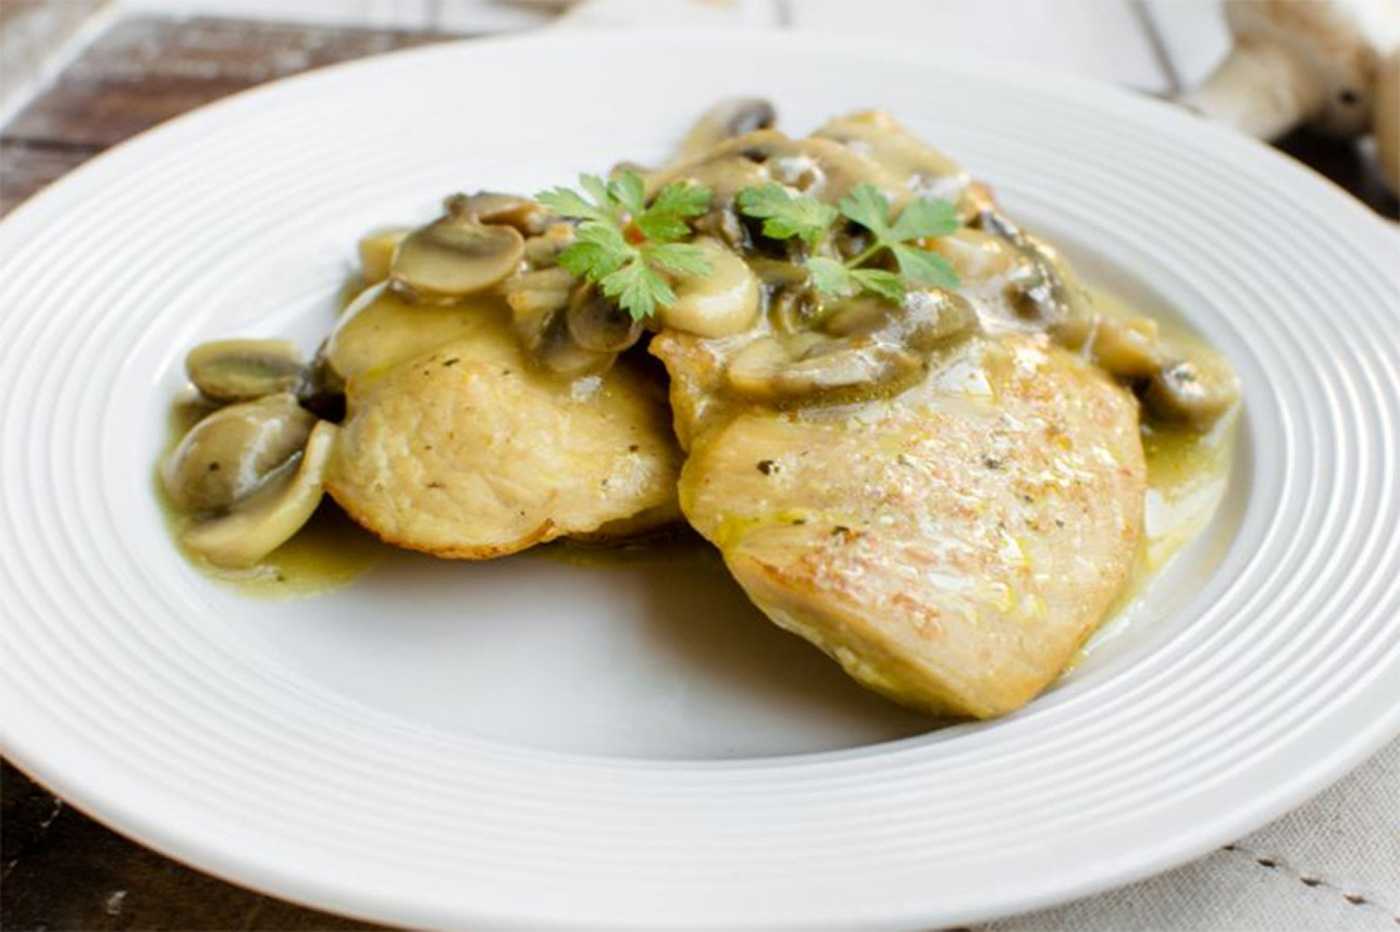 Chicken pieces with mushroom in mushroom sauce with parsley leaves on top over a white plate